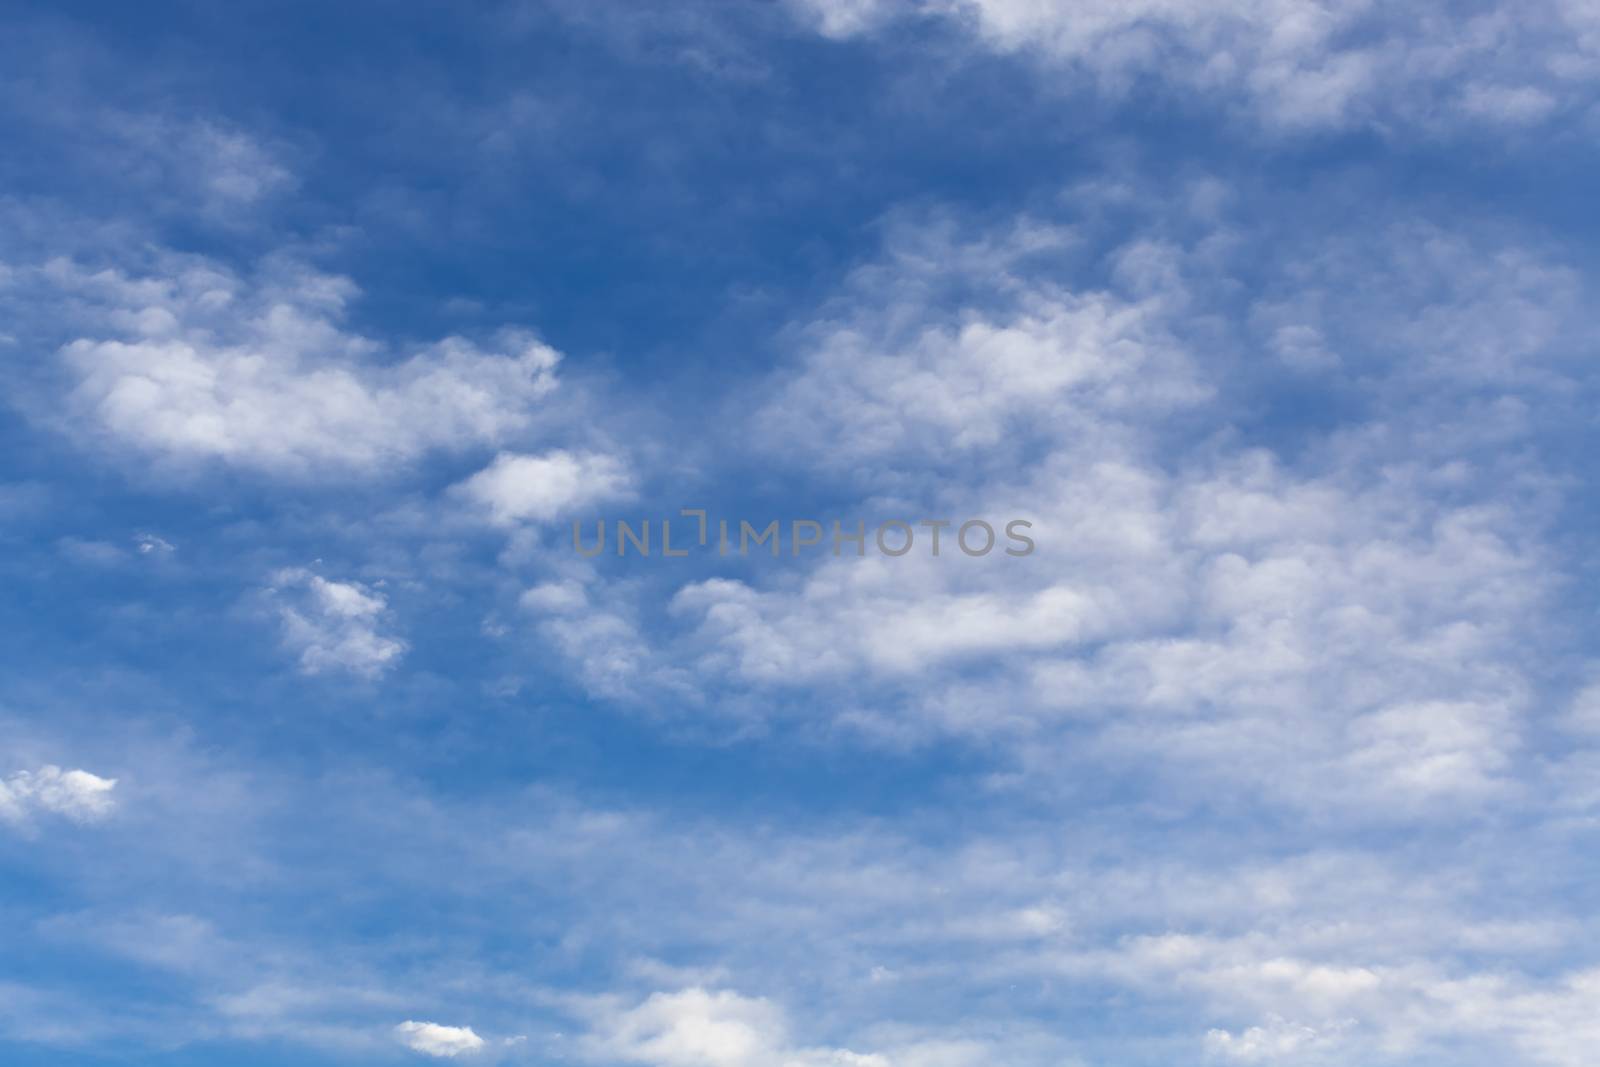 The beautiful blue sky with white clouds by fotooxotnik